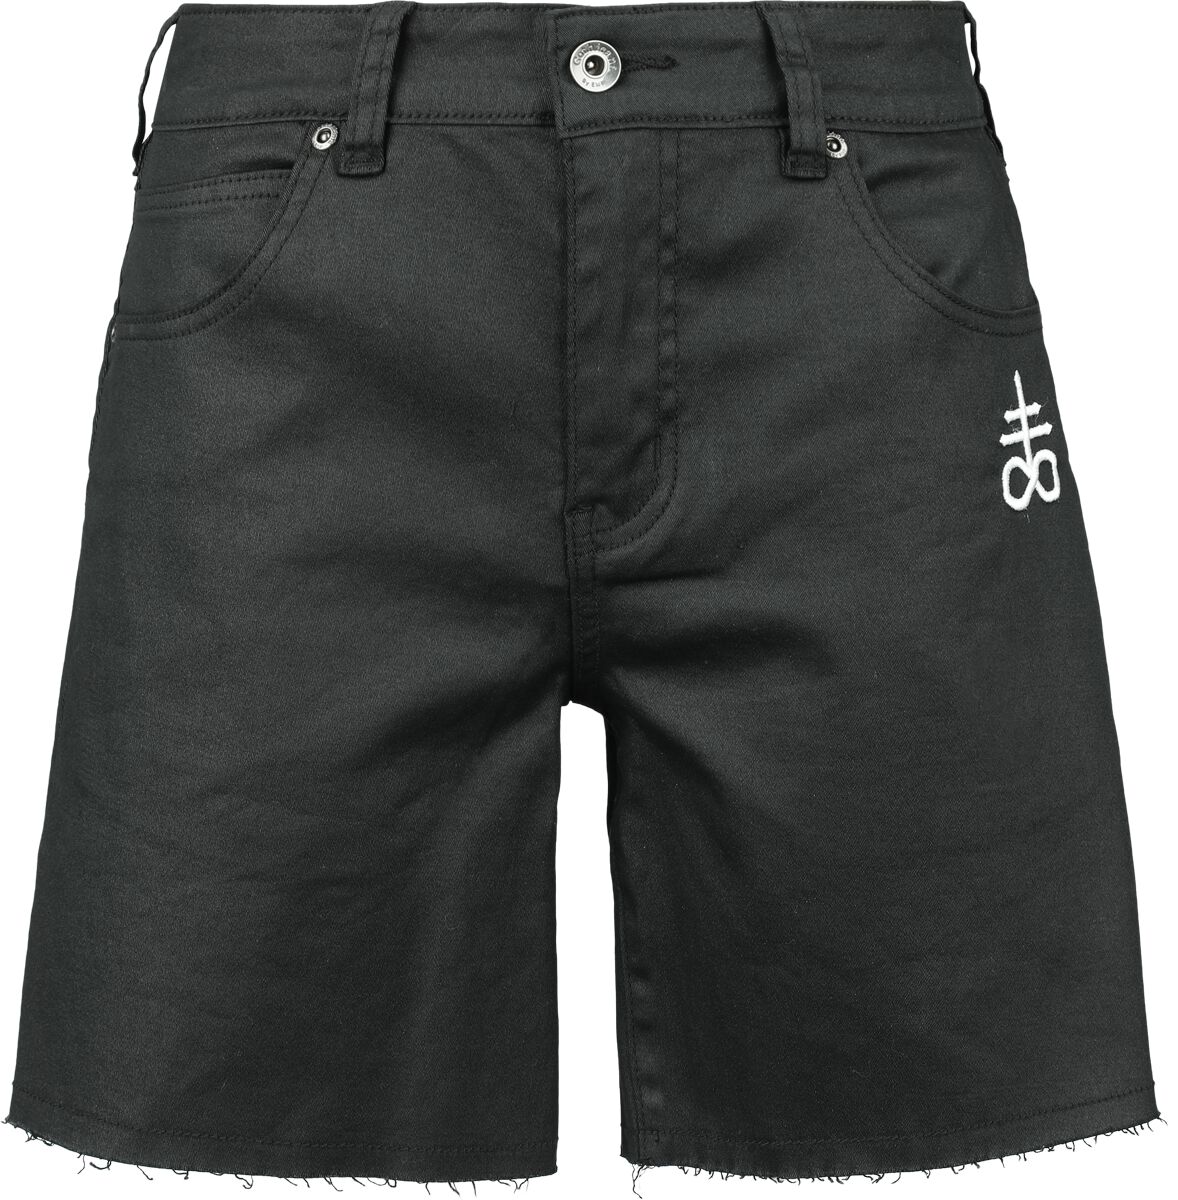 Black Blood by Gothicana Coated Shorts with Small Embroidery Short schwarz in 31